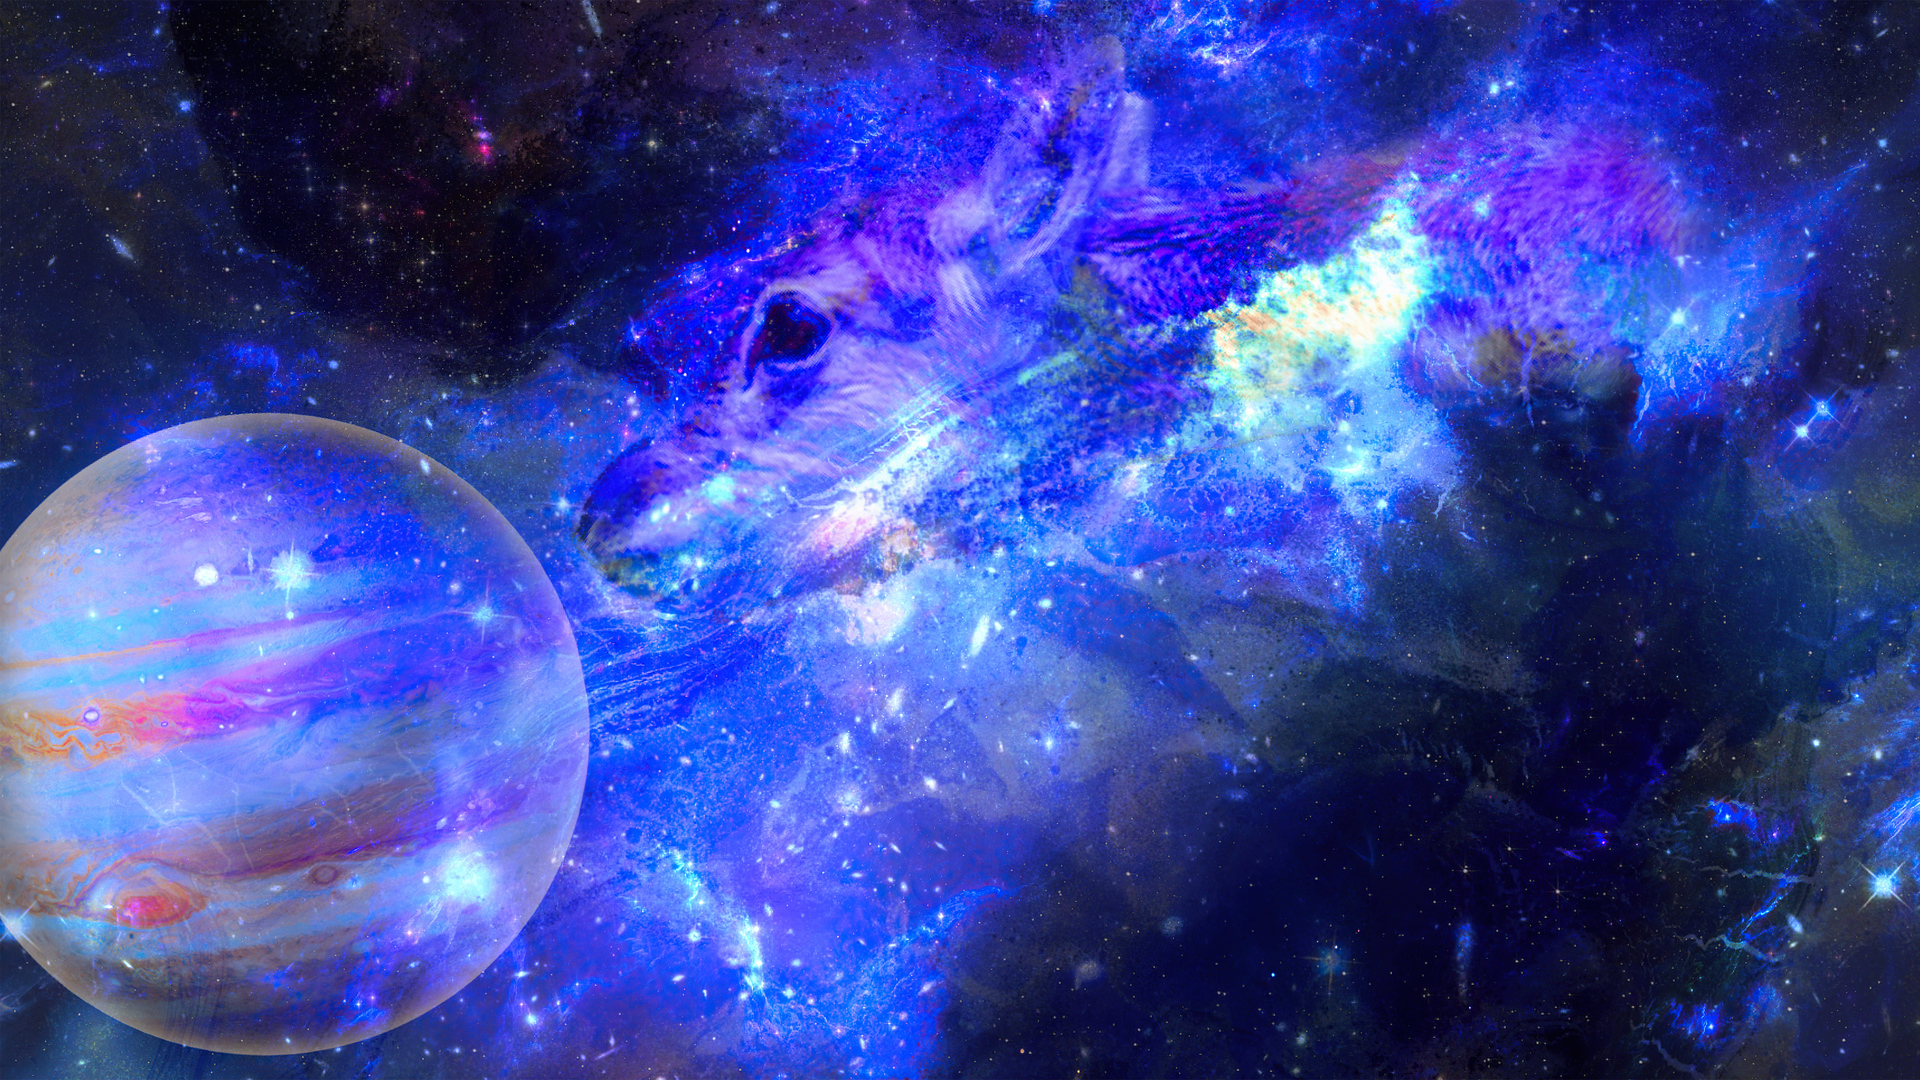 Abstract Space Wallpaper Kde Store